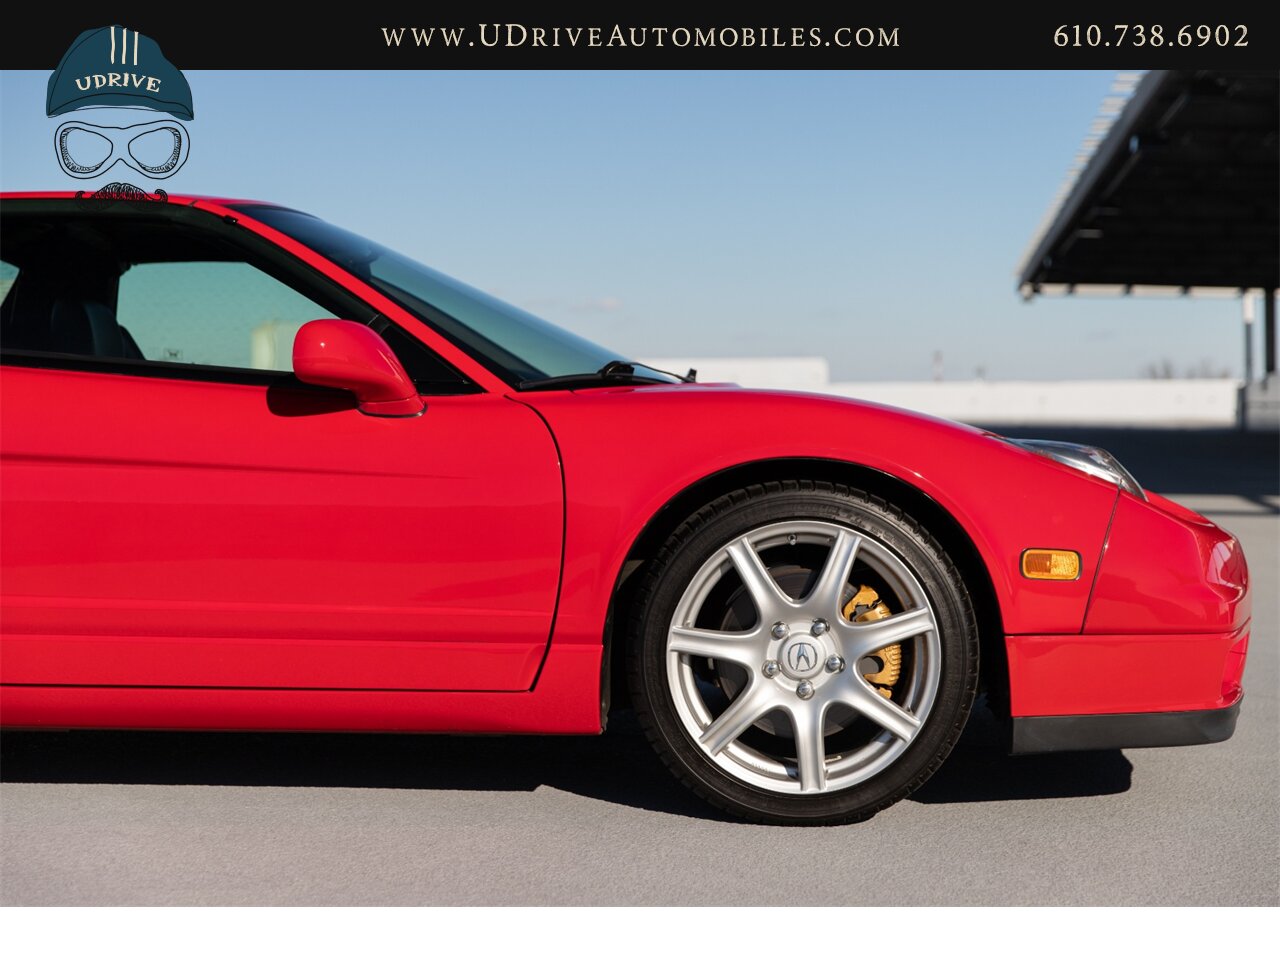 2004 Acura NSX NSX-T 21k mIles Red over Black  Fresh Timing Belt Service - Photo 15 - West Chester, PA 19382